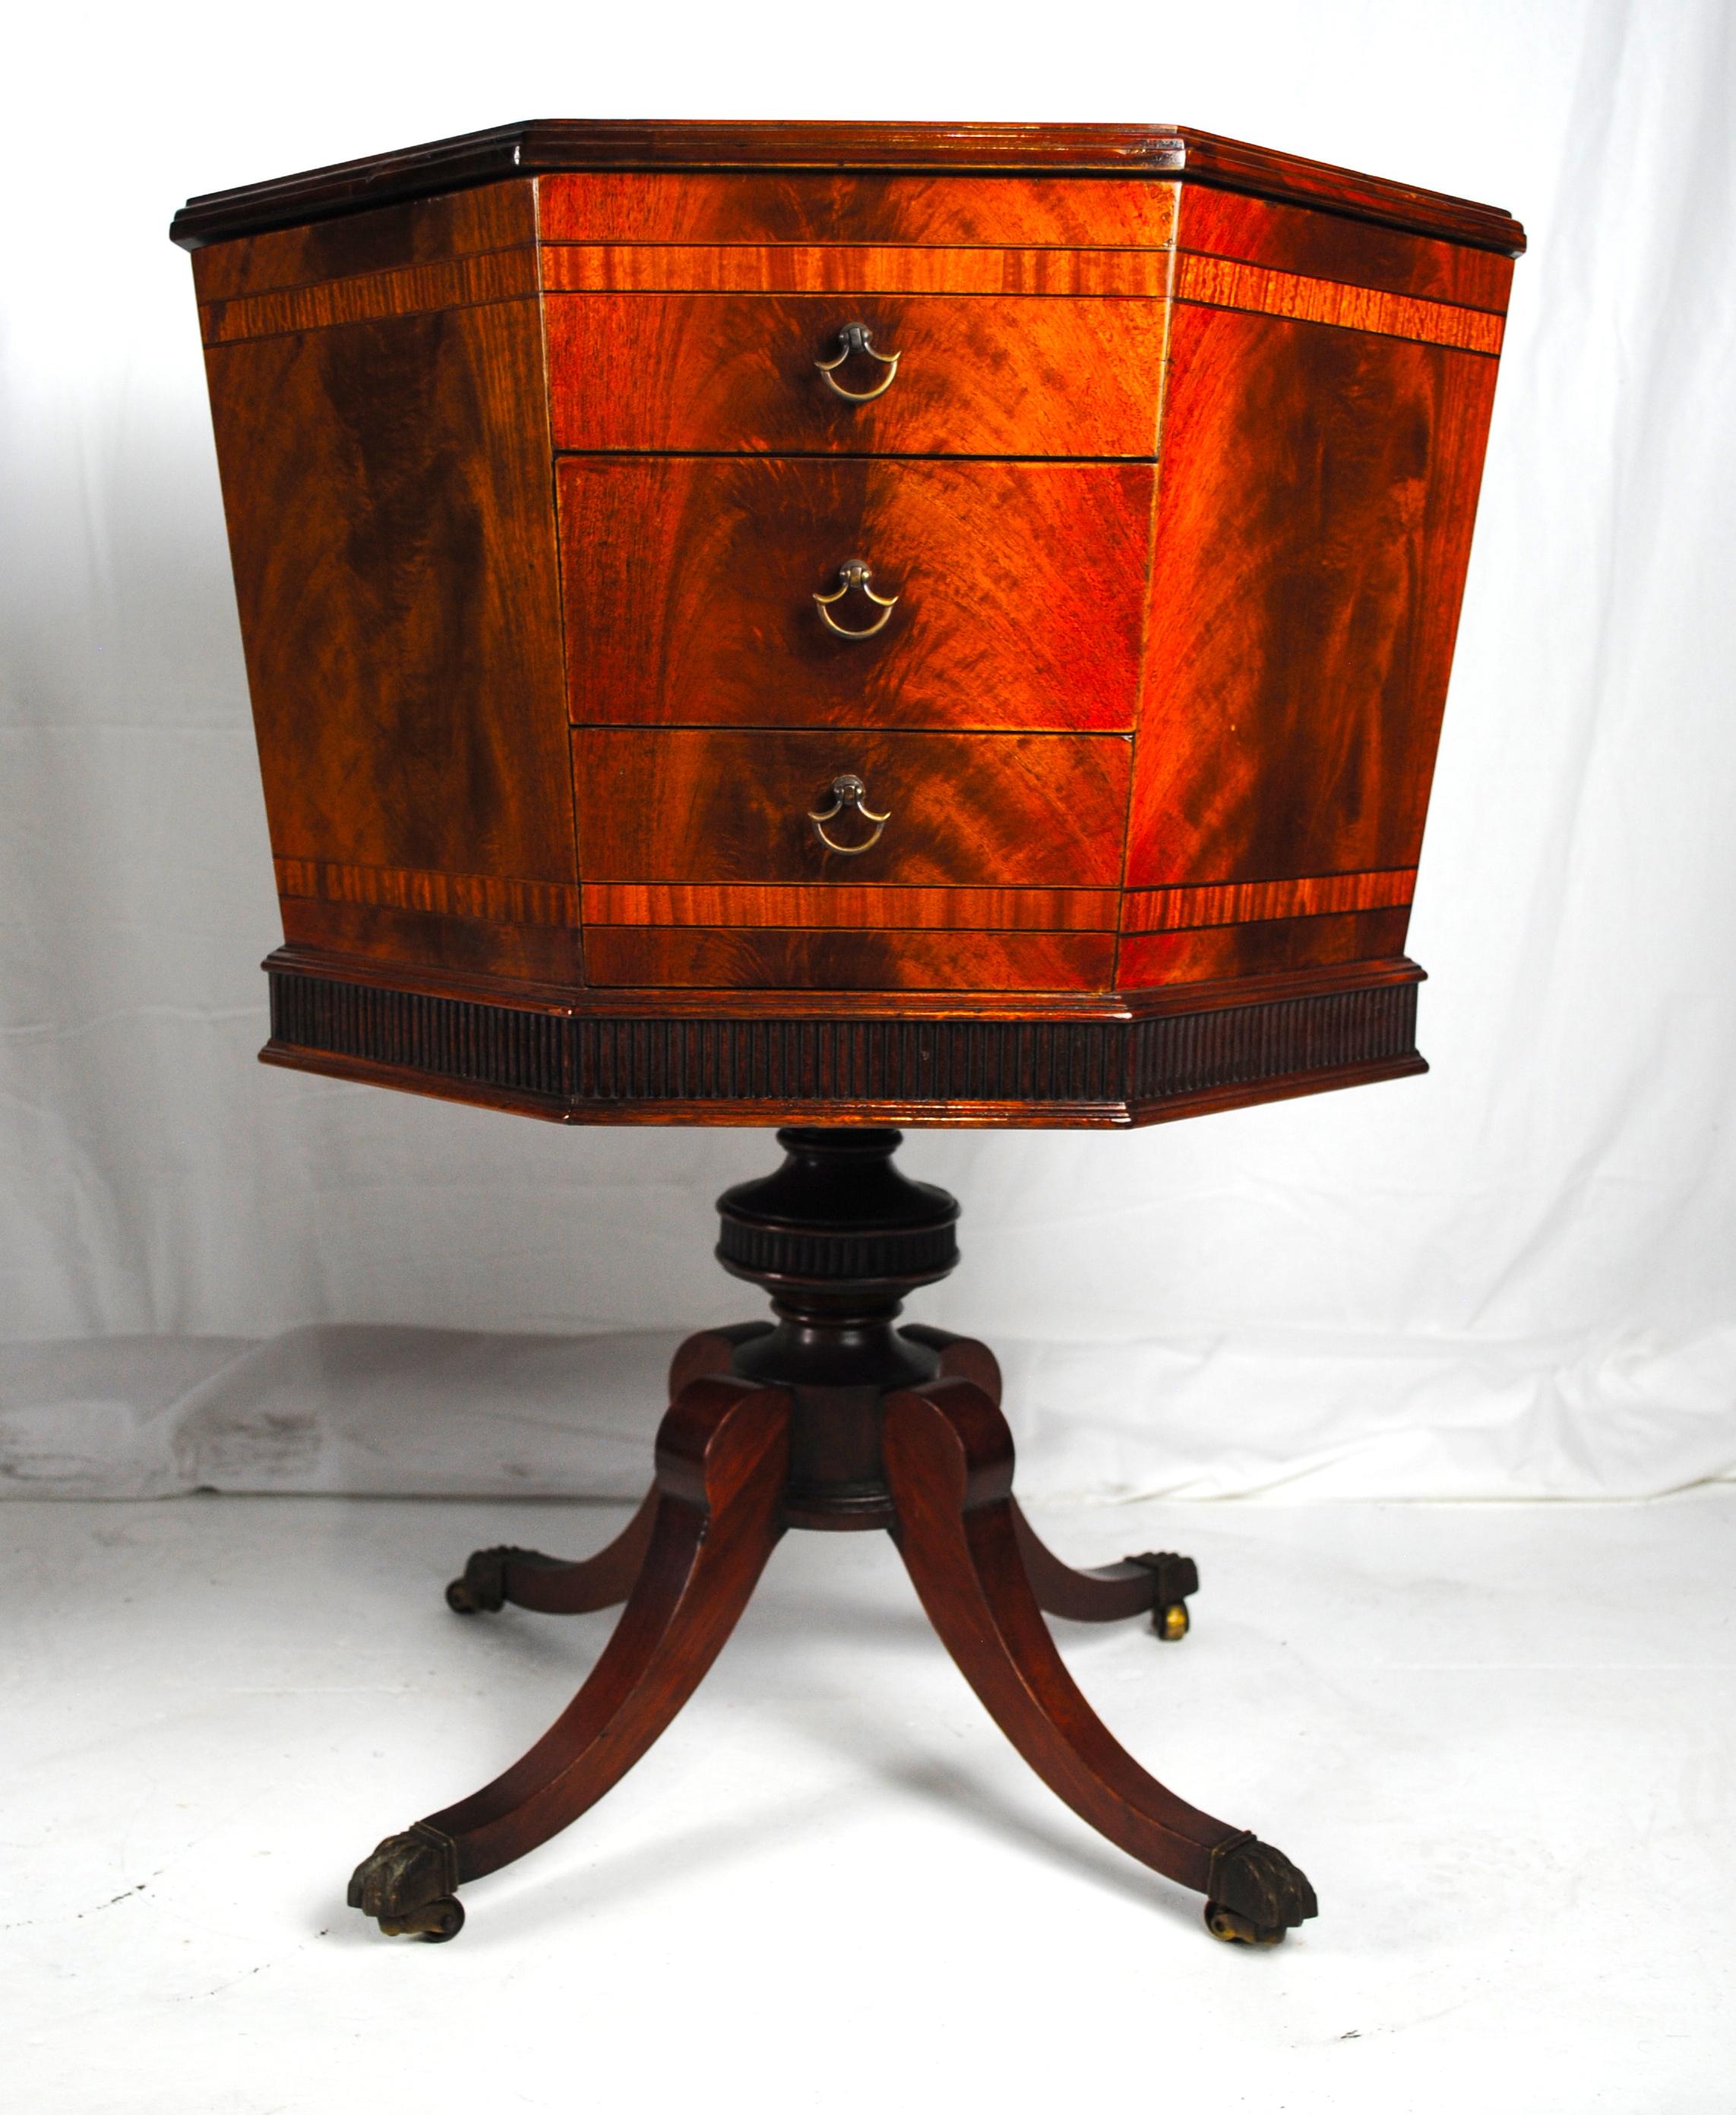 This unique pair of mahogany English regency style sewing/side tables, Cerca, 1820. 

It is a very rear find two identical and finely made sowing boxes together with such an adorable story attached to them. On opening the top lid one finds the